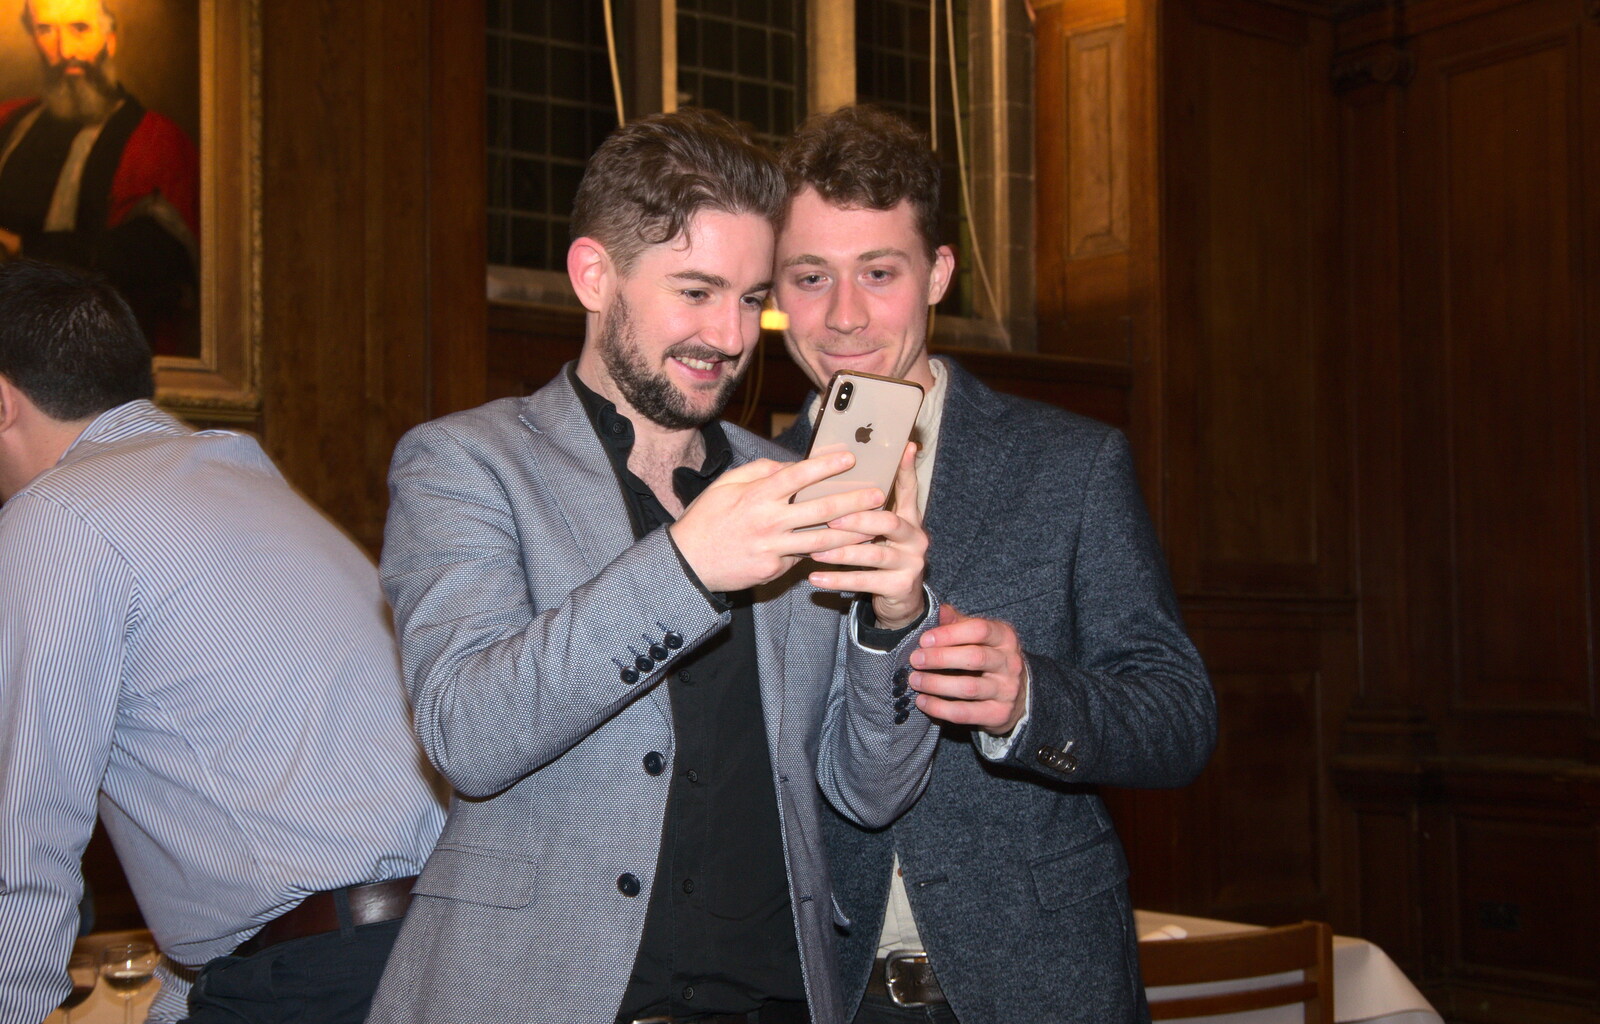 Dominic and Alex from SwiftKey's Ten Year Anniversary Reunion, Selwyn College, Cambridge - 11th January 2019